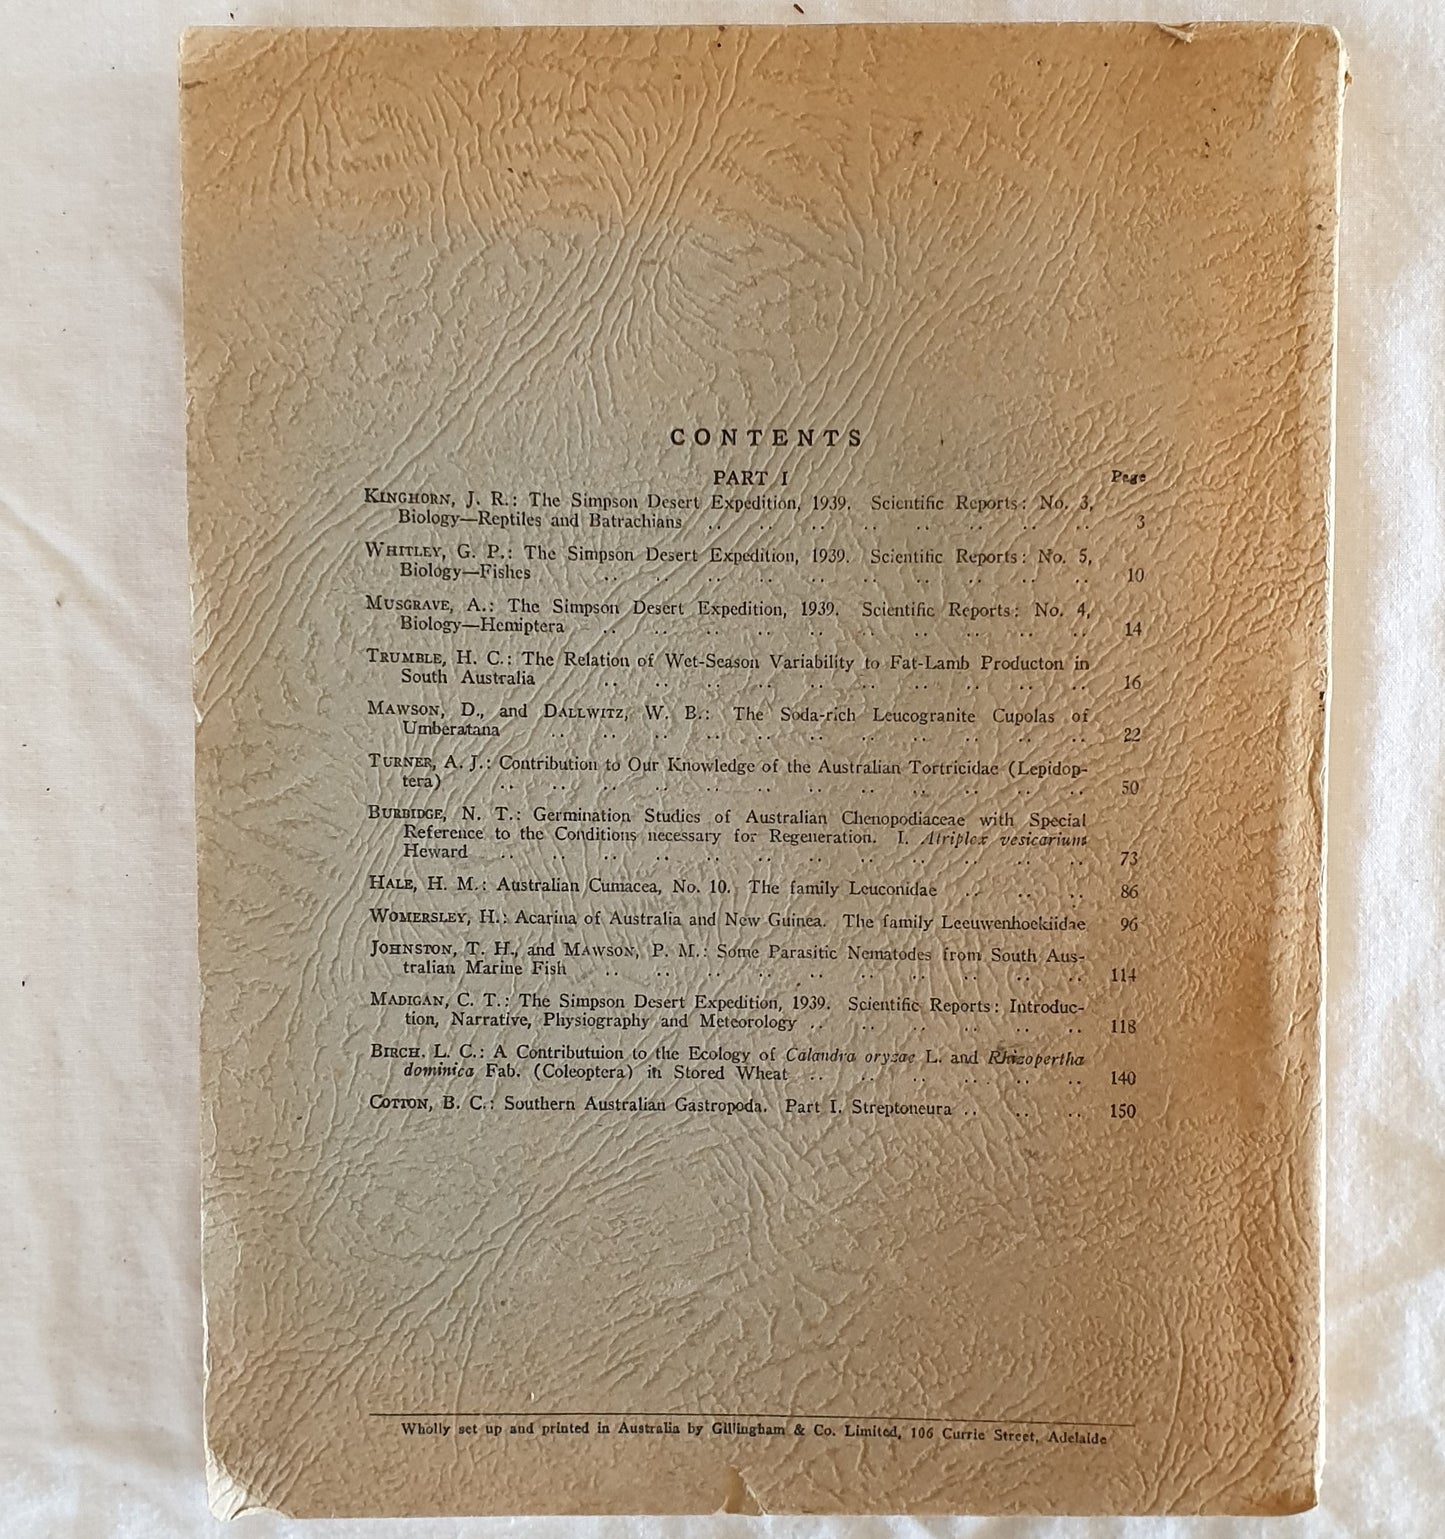 Transactions of The Royal Society of South Australia